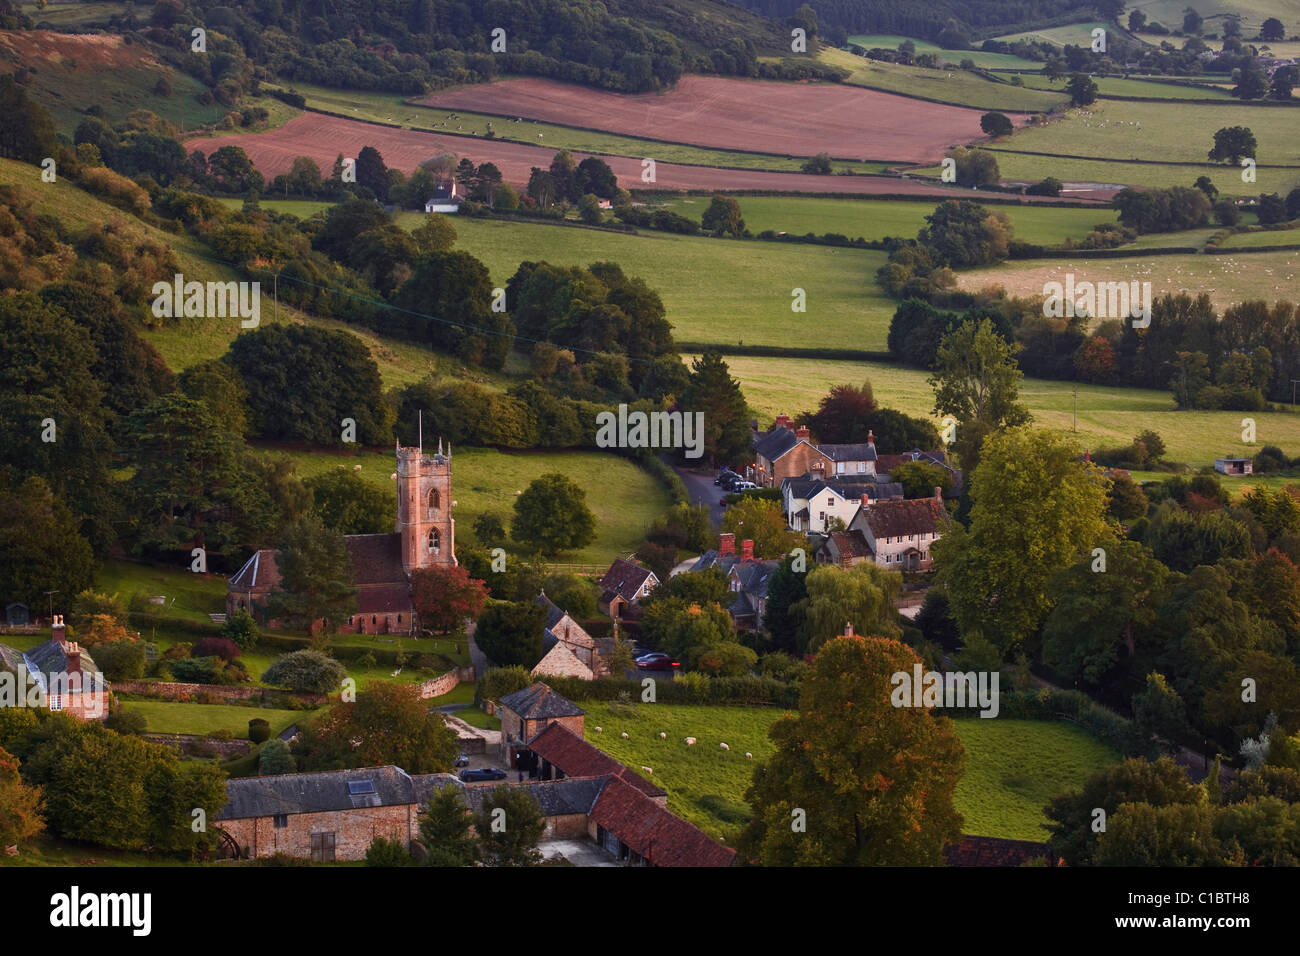 The remains of the day's light at the beautiful village of Corton Denham in Somerset. Stock Photo